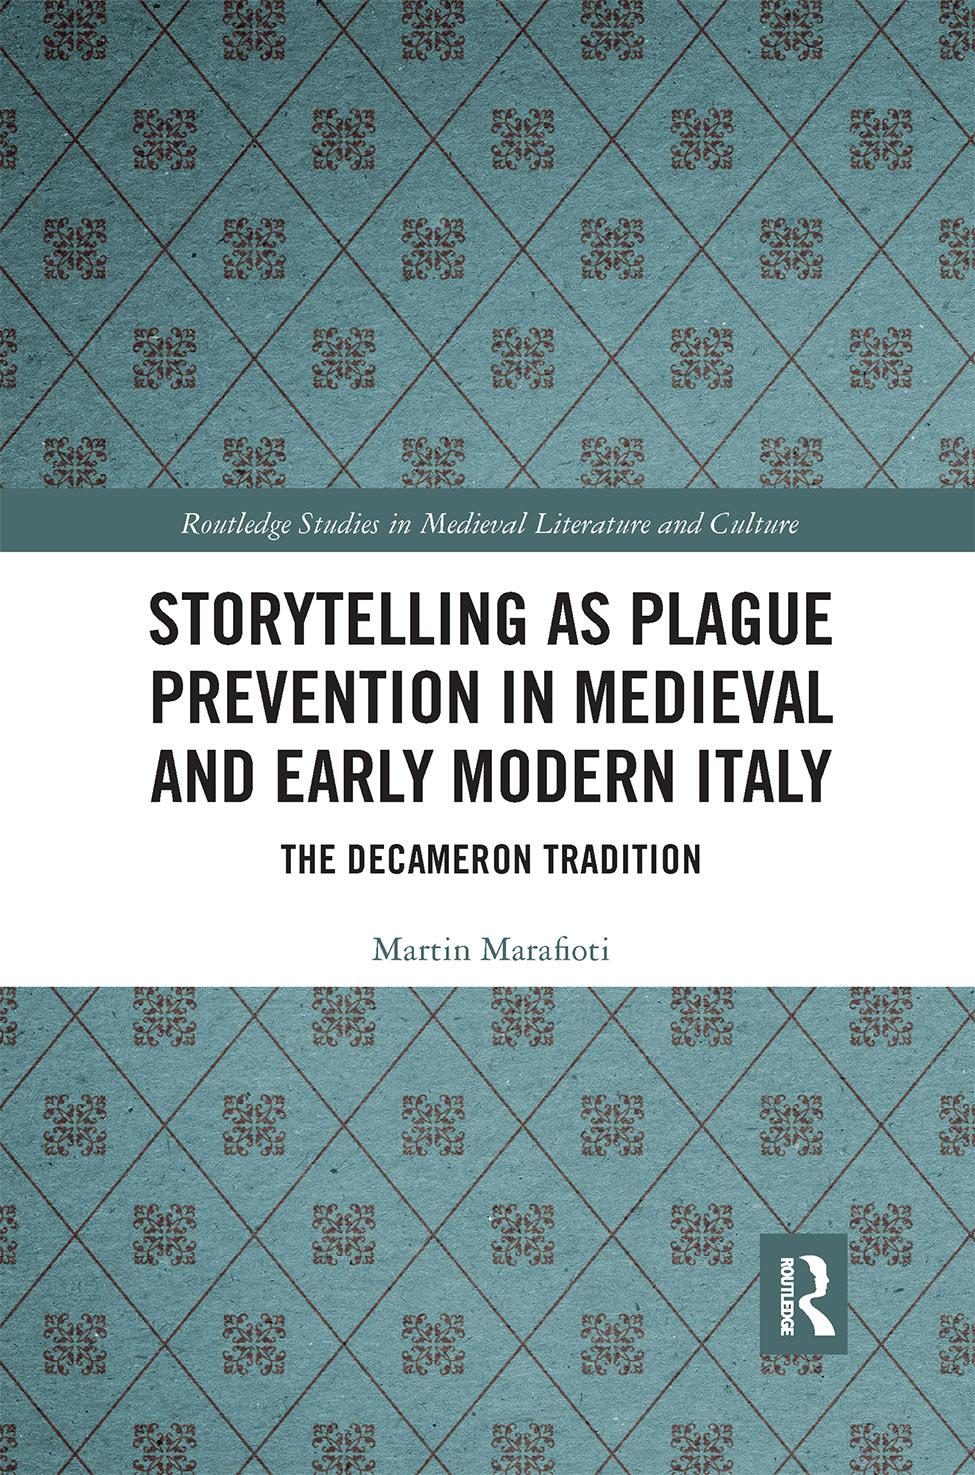 Storytelling As Plague Prevention In Medieval And Early Modern Italy: The Decameron Tradition (Routledge Studies In Medieval Literature And Culture) by Martin Marafioti